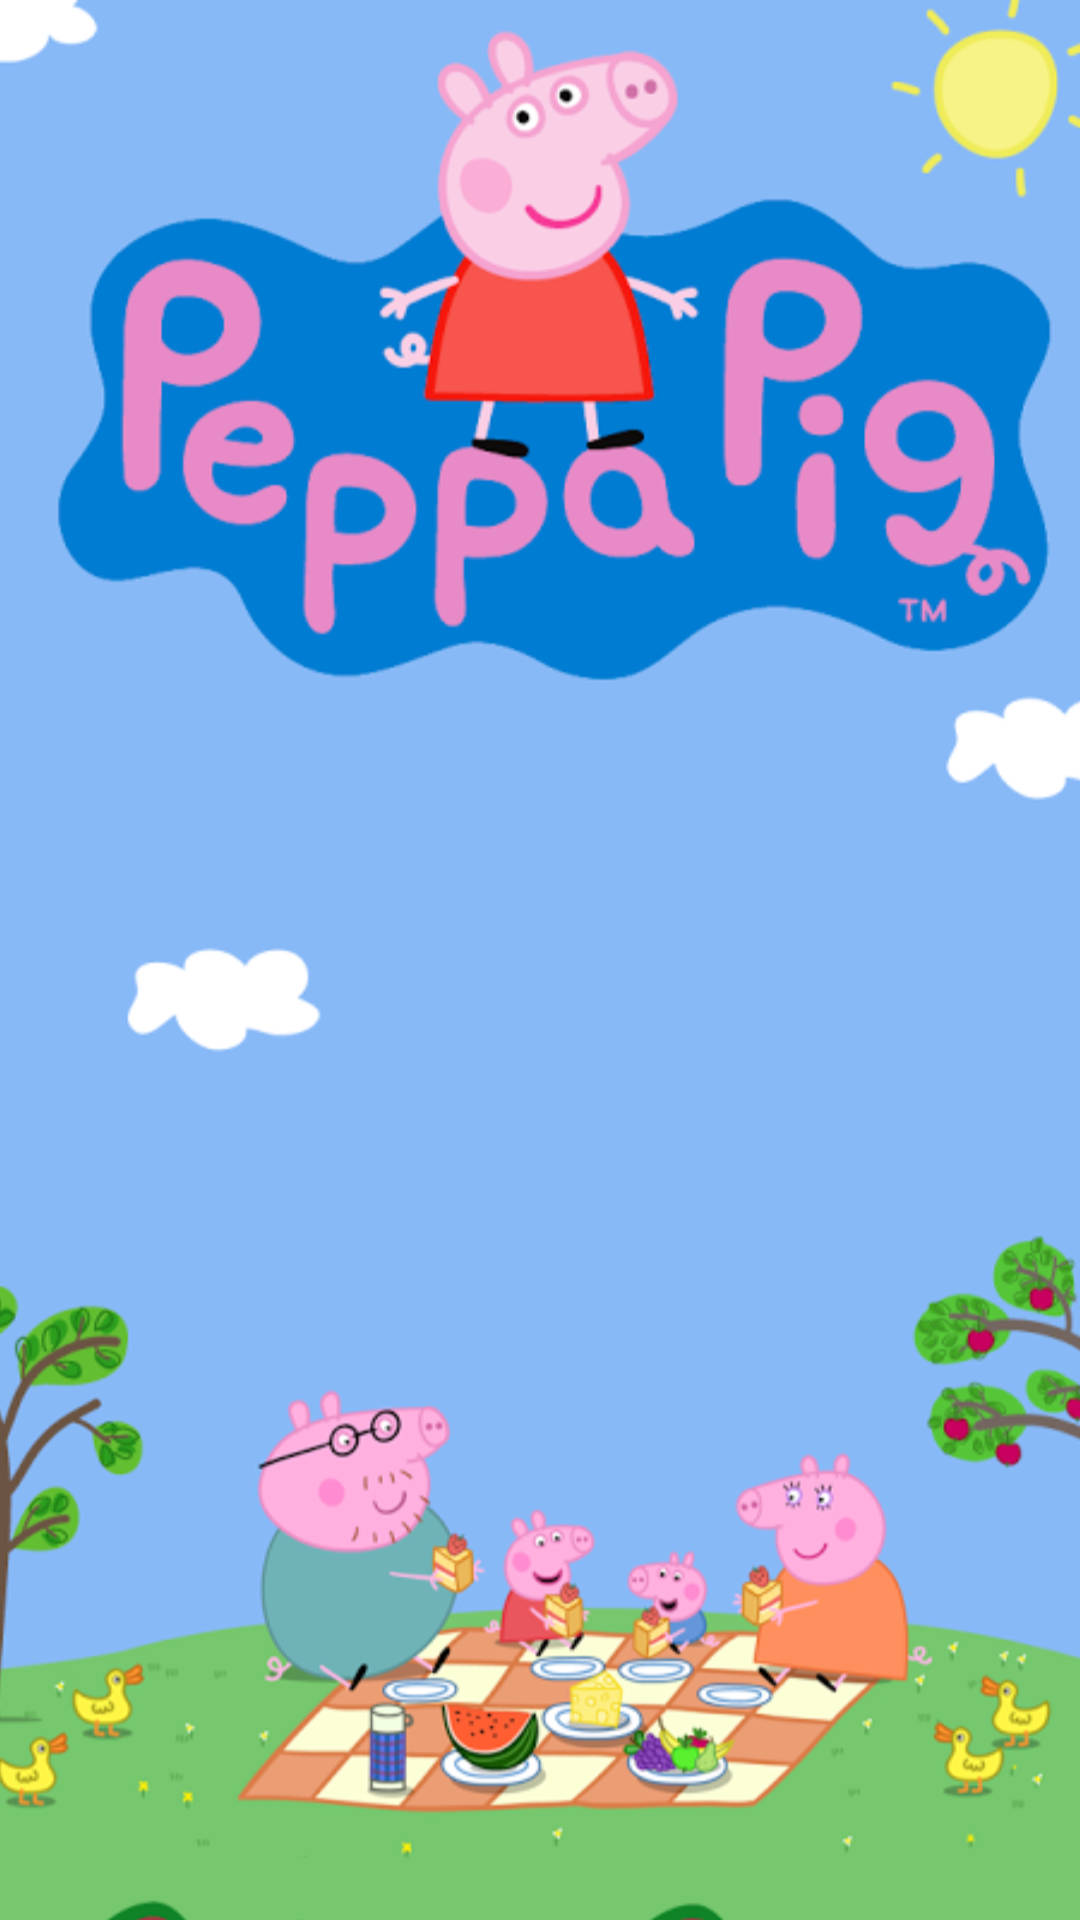 Peppa Pig Iphone Family Picnic Outdoors